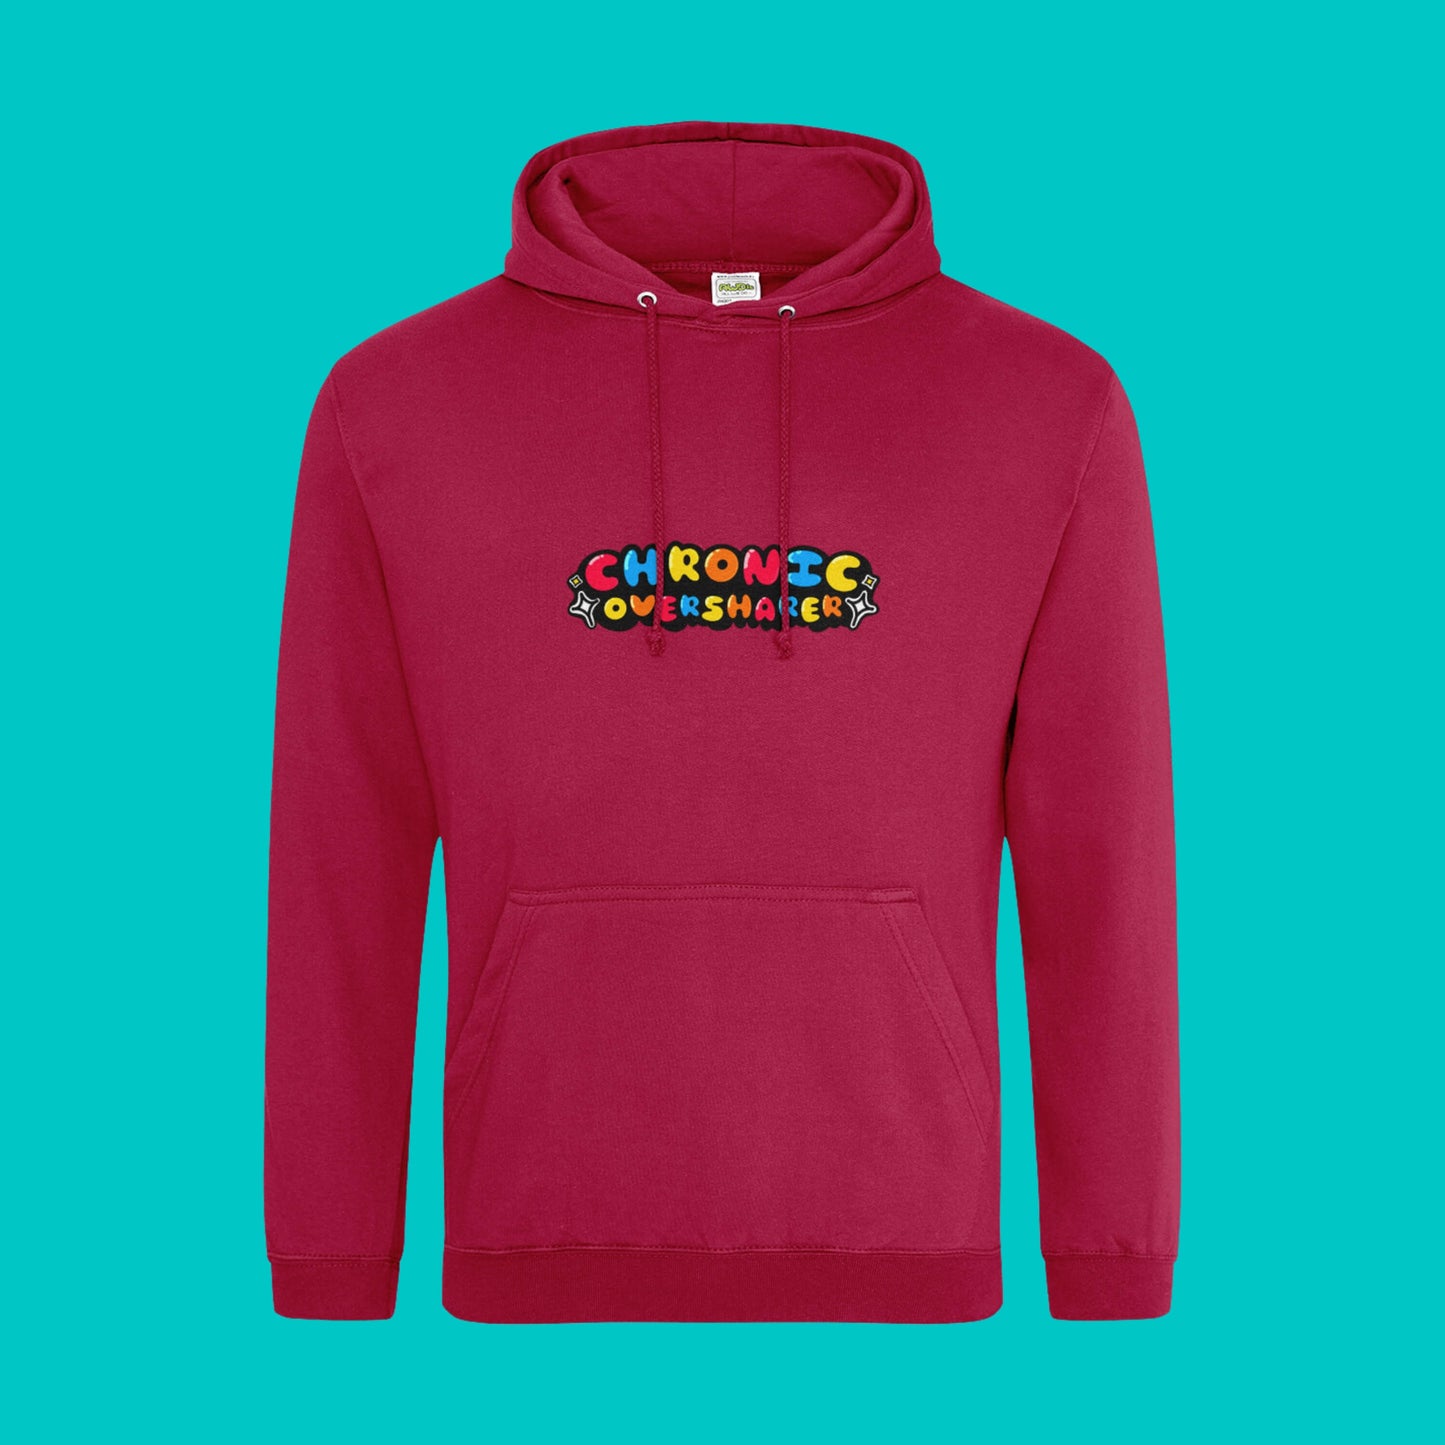 The Chronic Over Sharer Hot Chilli Red Hoodie shown on a blue background. The Hot Chilli Red hoodie features a drawstring hood, a large front pocket and the text 'chronic oversharer' in rainbow bubble font with a black shadow effect and white sparkles. The design was created to raise awareness for neurodivergent disorders such as ADHD.